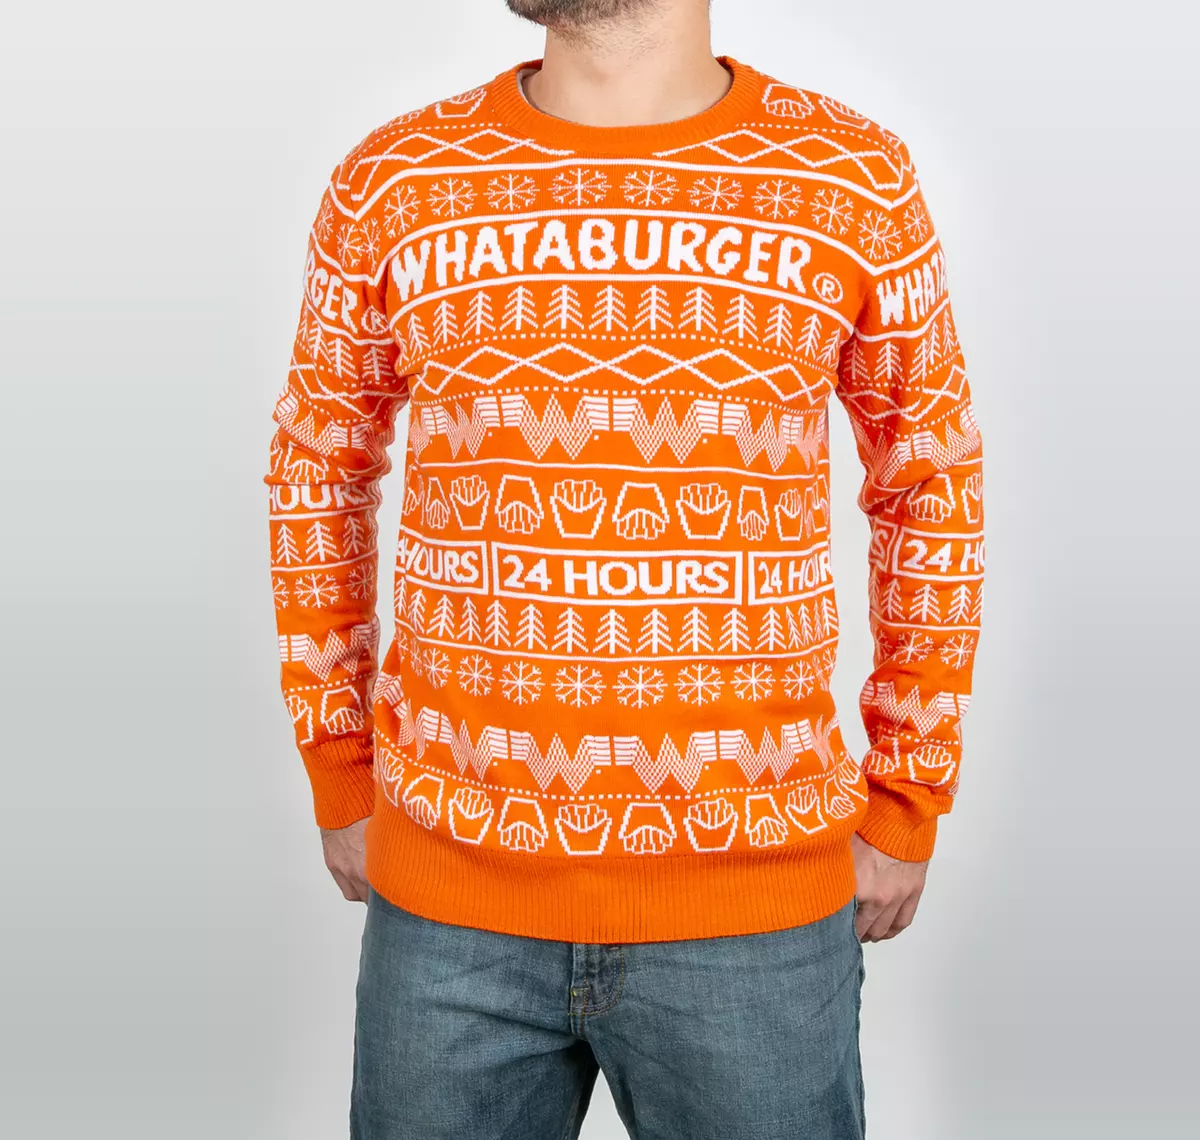 Whataburger Now Has an Ugly Christmas Sweater for Your Parties